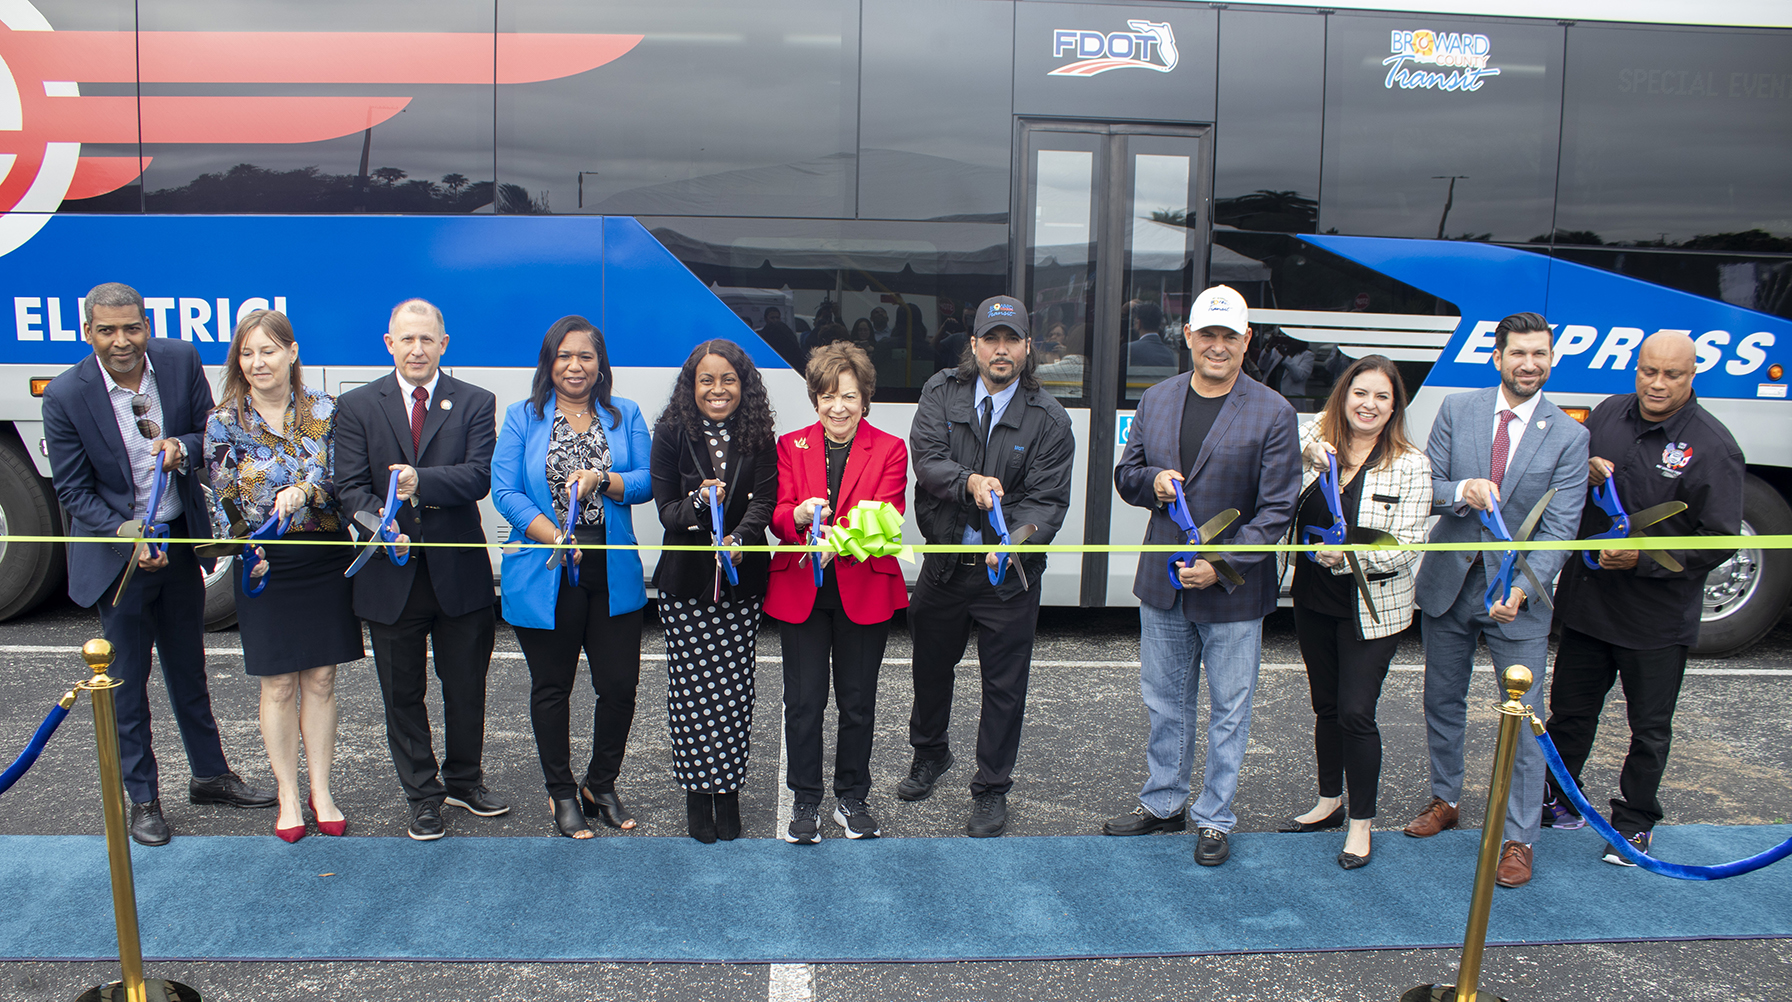 Broward County Transit Unveils First Electric Express Bus Passenger